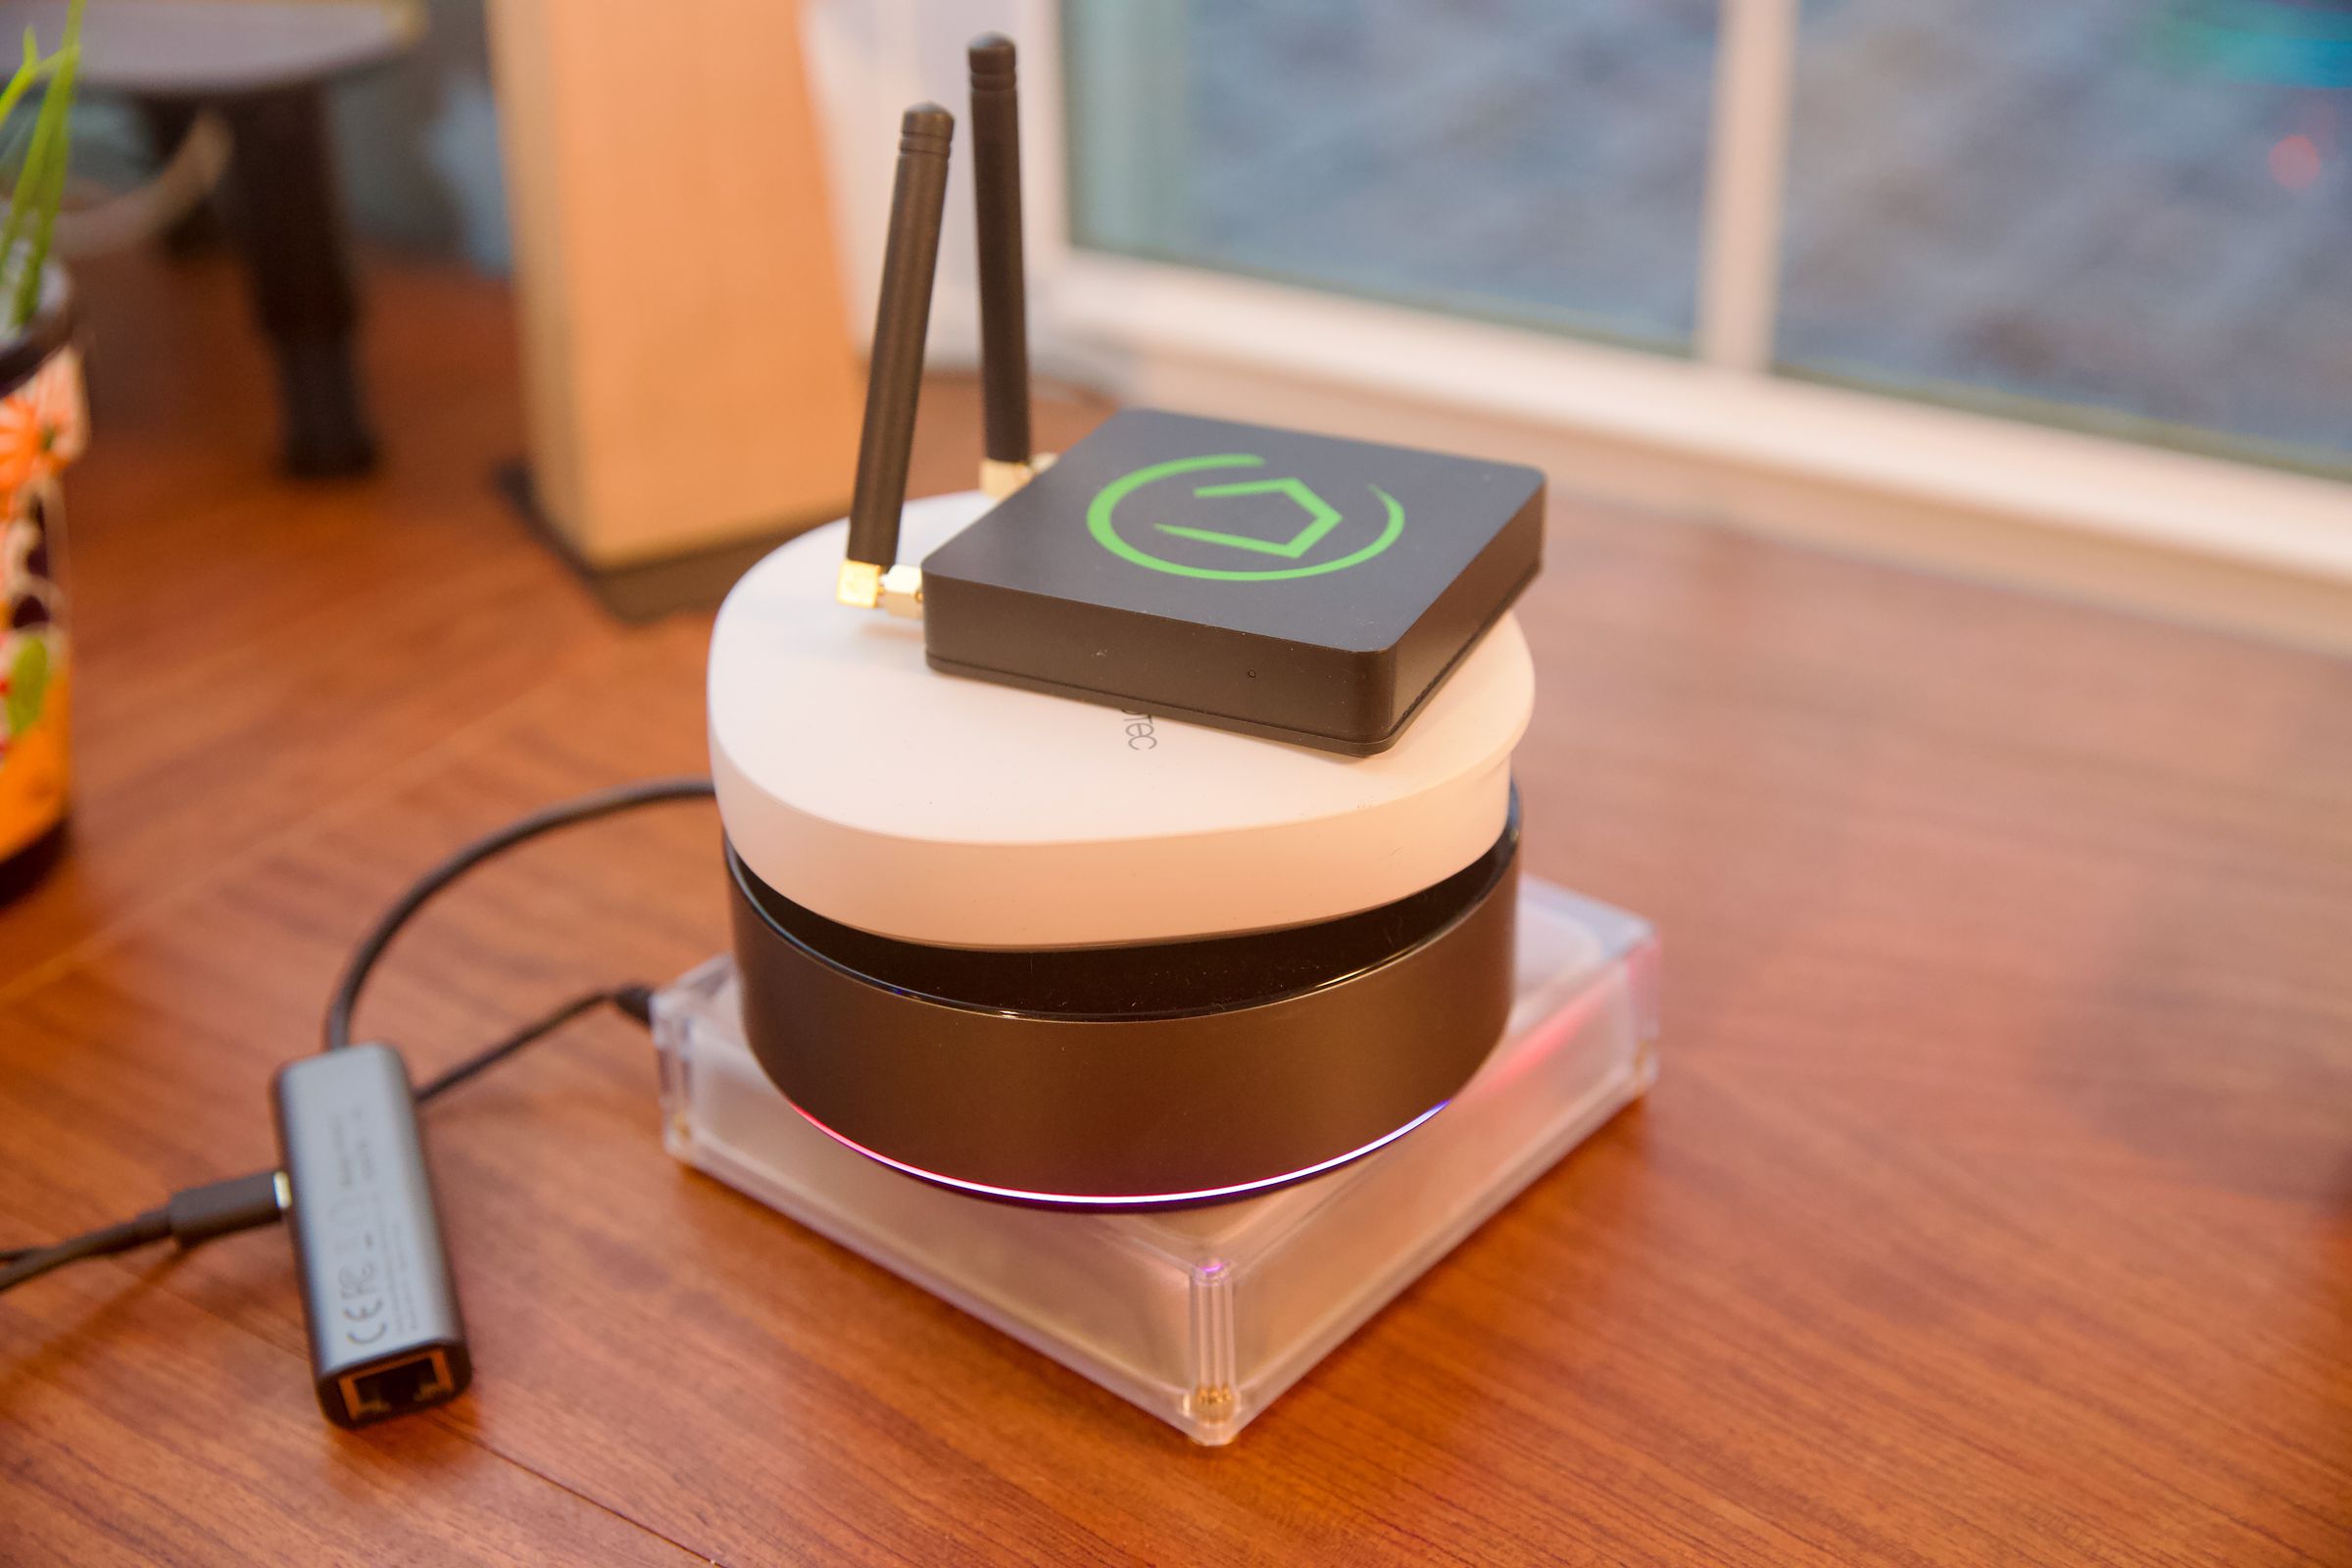 Four smart home hubs stacked on a wooden desk.